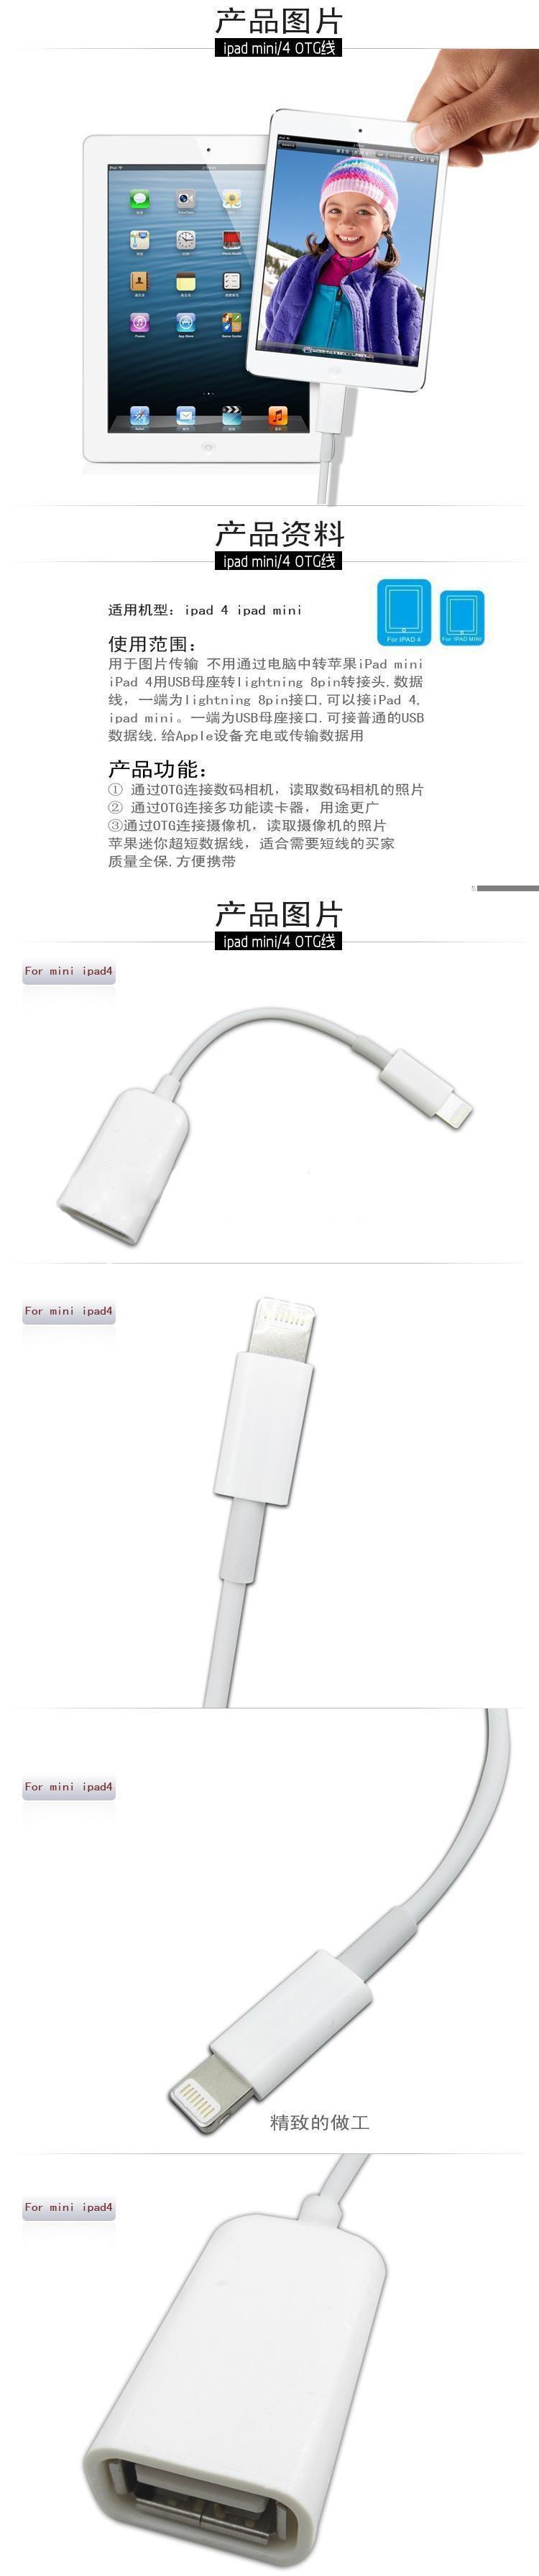 lightning to usb otg cable for iphone 55s6 ipad 4 and ipad mini mobile store special best offer buy one lk sri lanka 14644 1 - Lightning to USB OTG Cable for iphone 5/5s/6 iPad 4 and iPad Mini